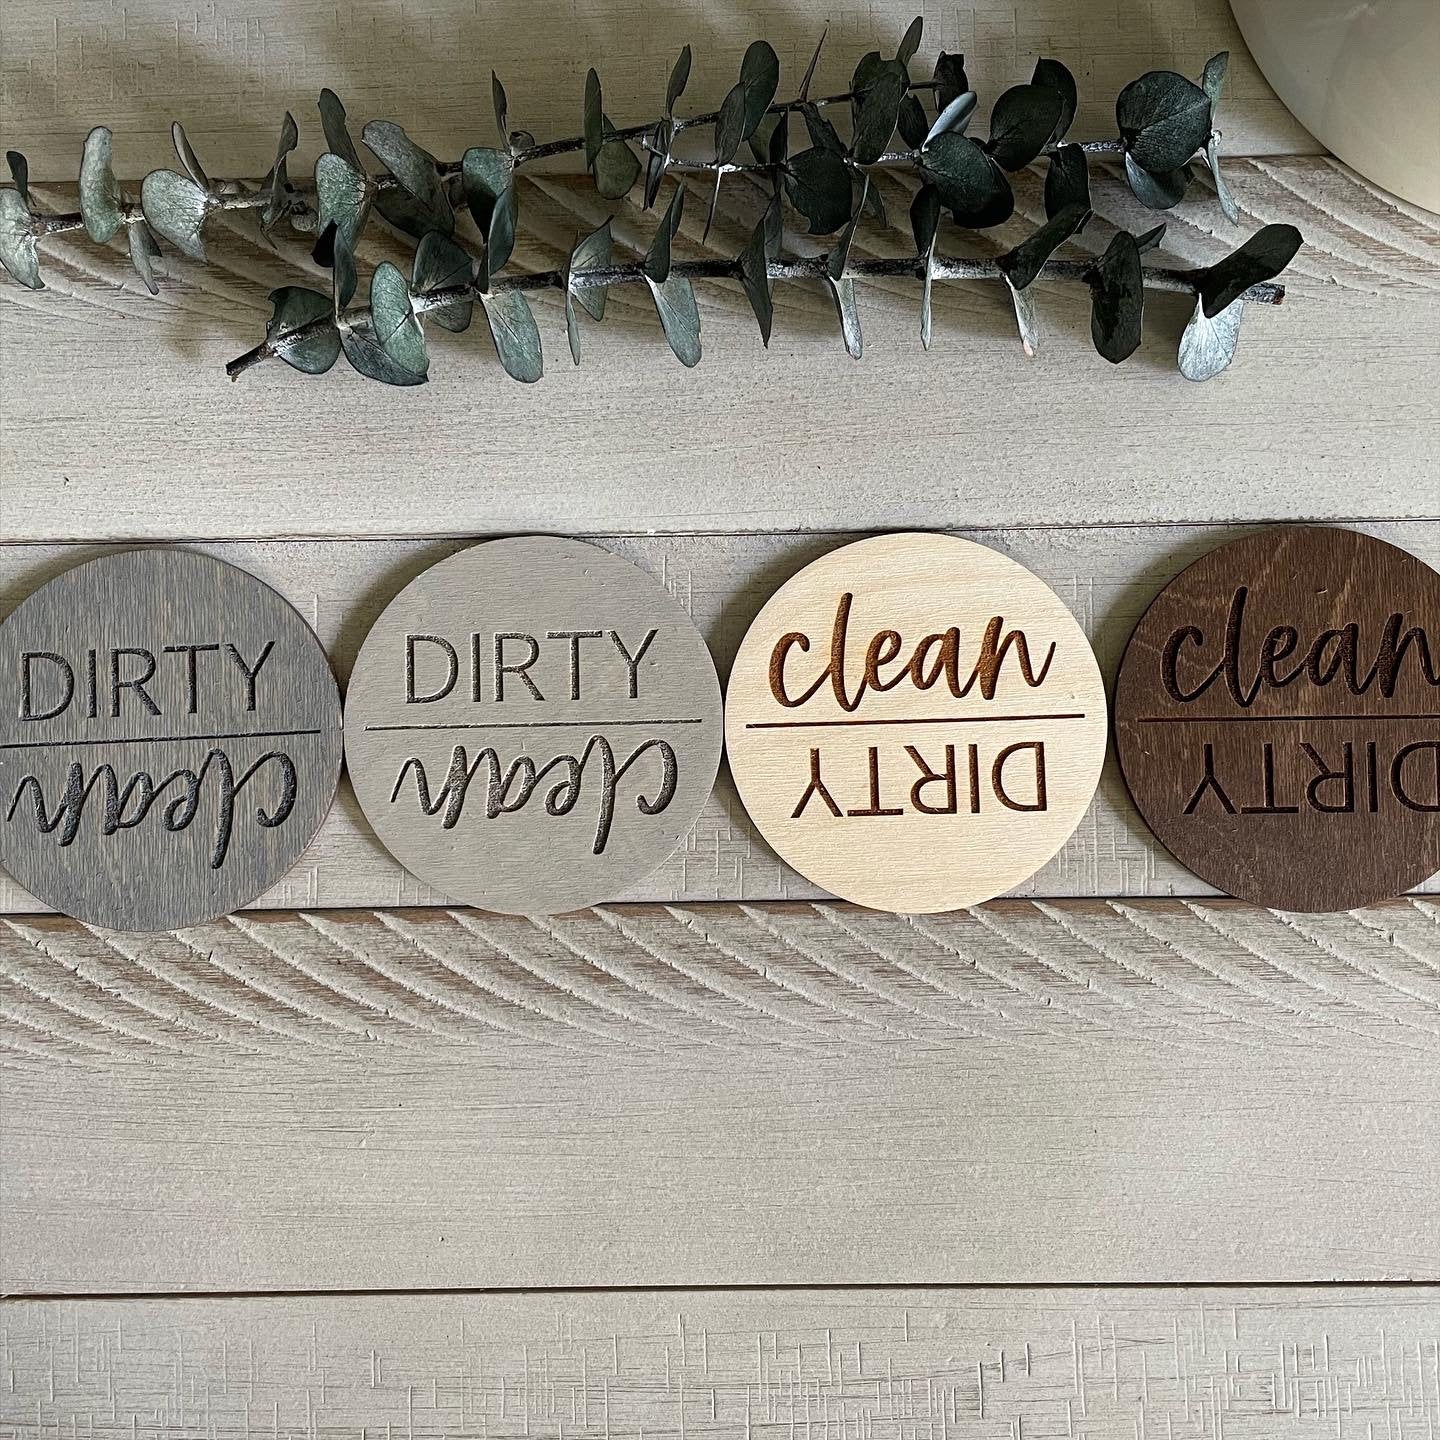 Dirty Clean Dishwasher Magnet,Dishwasher Magnet Clean Dirty Sign